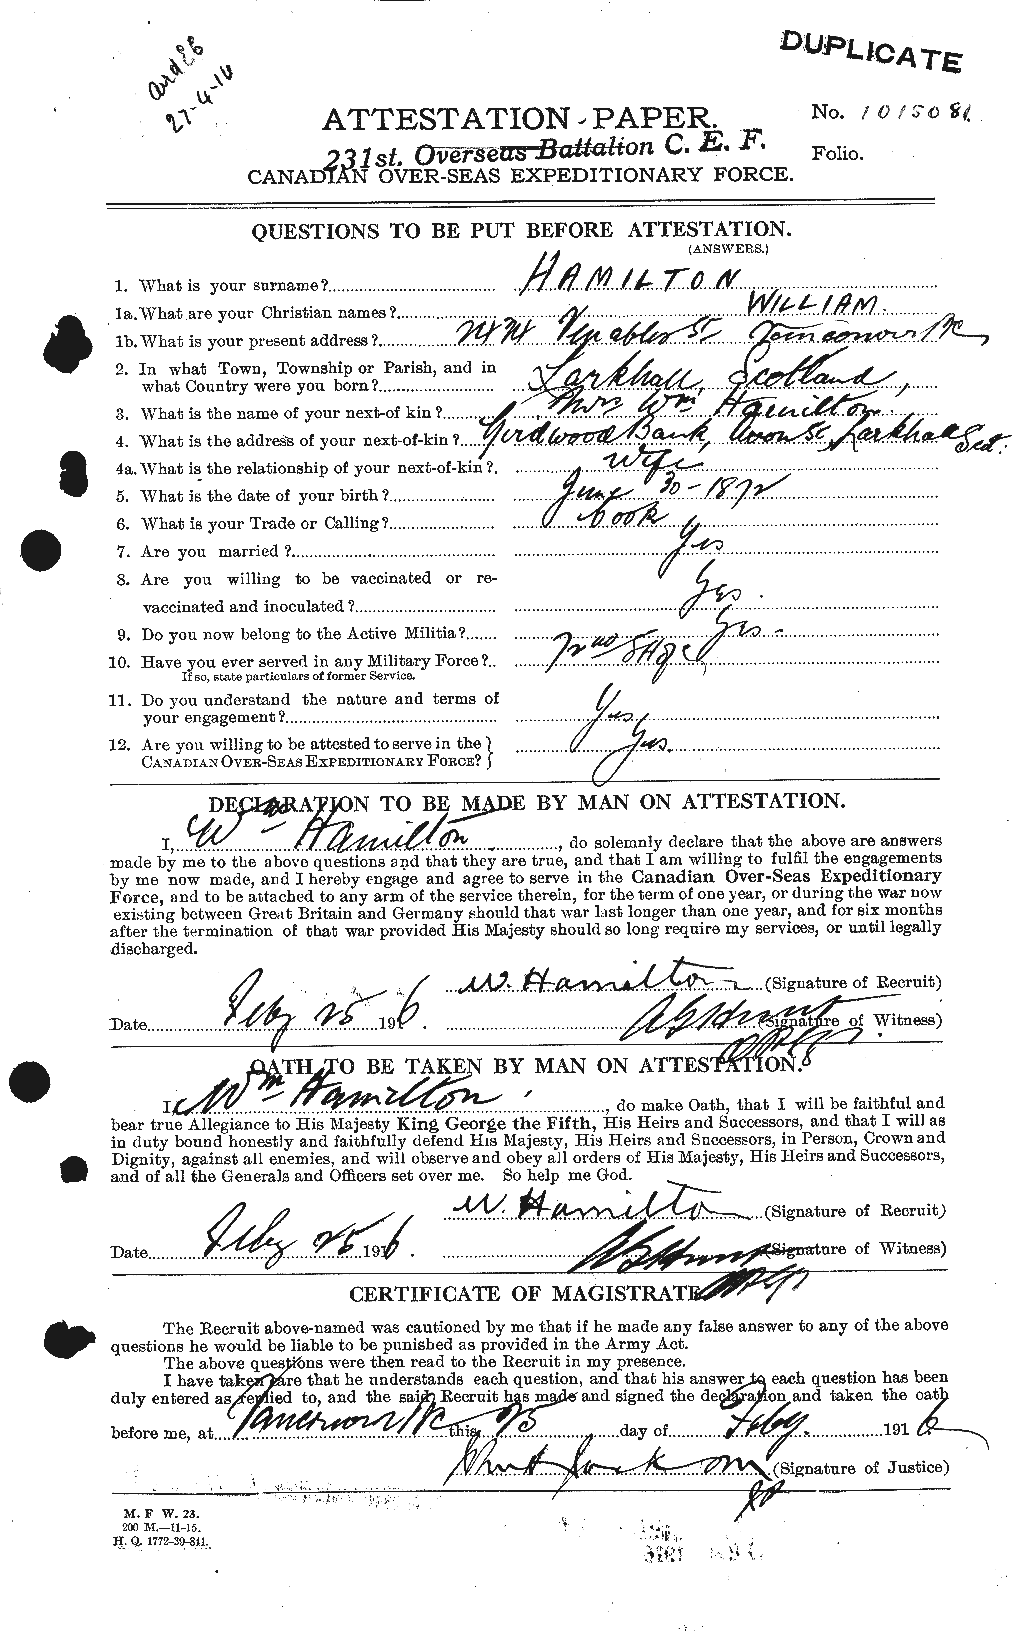 Personnel Records of the First World War - CEF 374852a